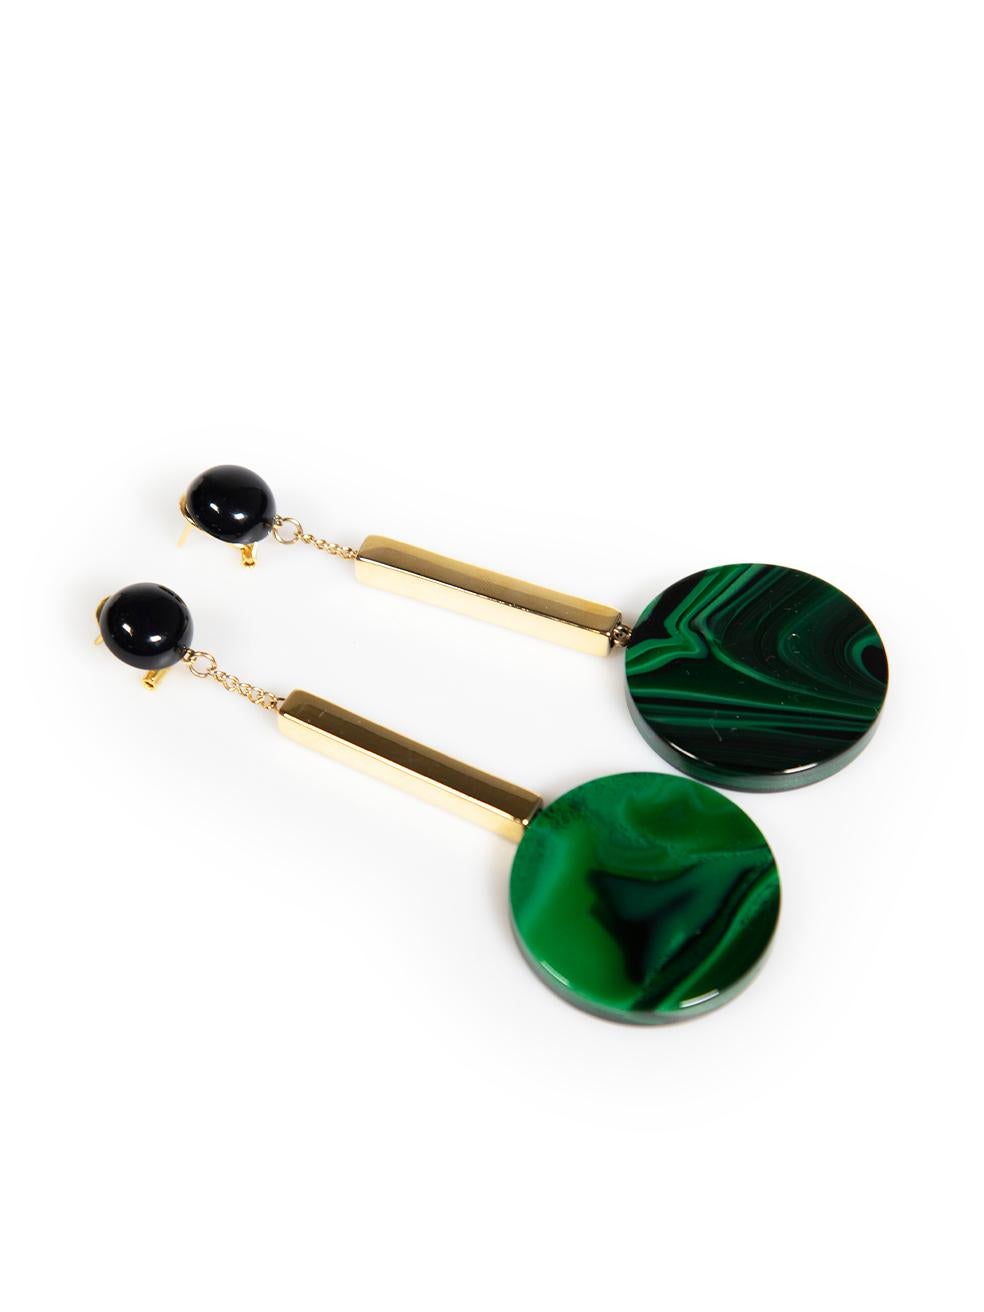 CONDITION is Good. Minor wear to earrings is evident. Light scratches to the metal and resin on this used Rachel Comey designer resale item.
 
Details
Green and gold
Resin
Drop earrings
Gold tone metal bar
Stud and clip fastening
